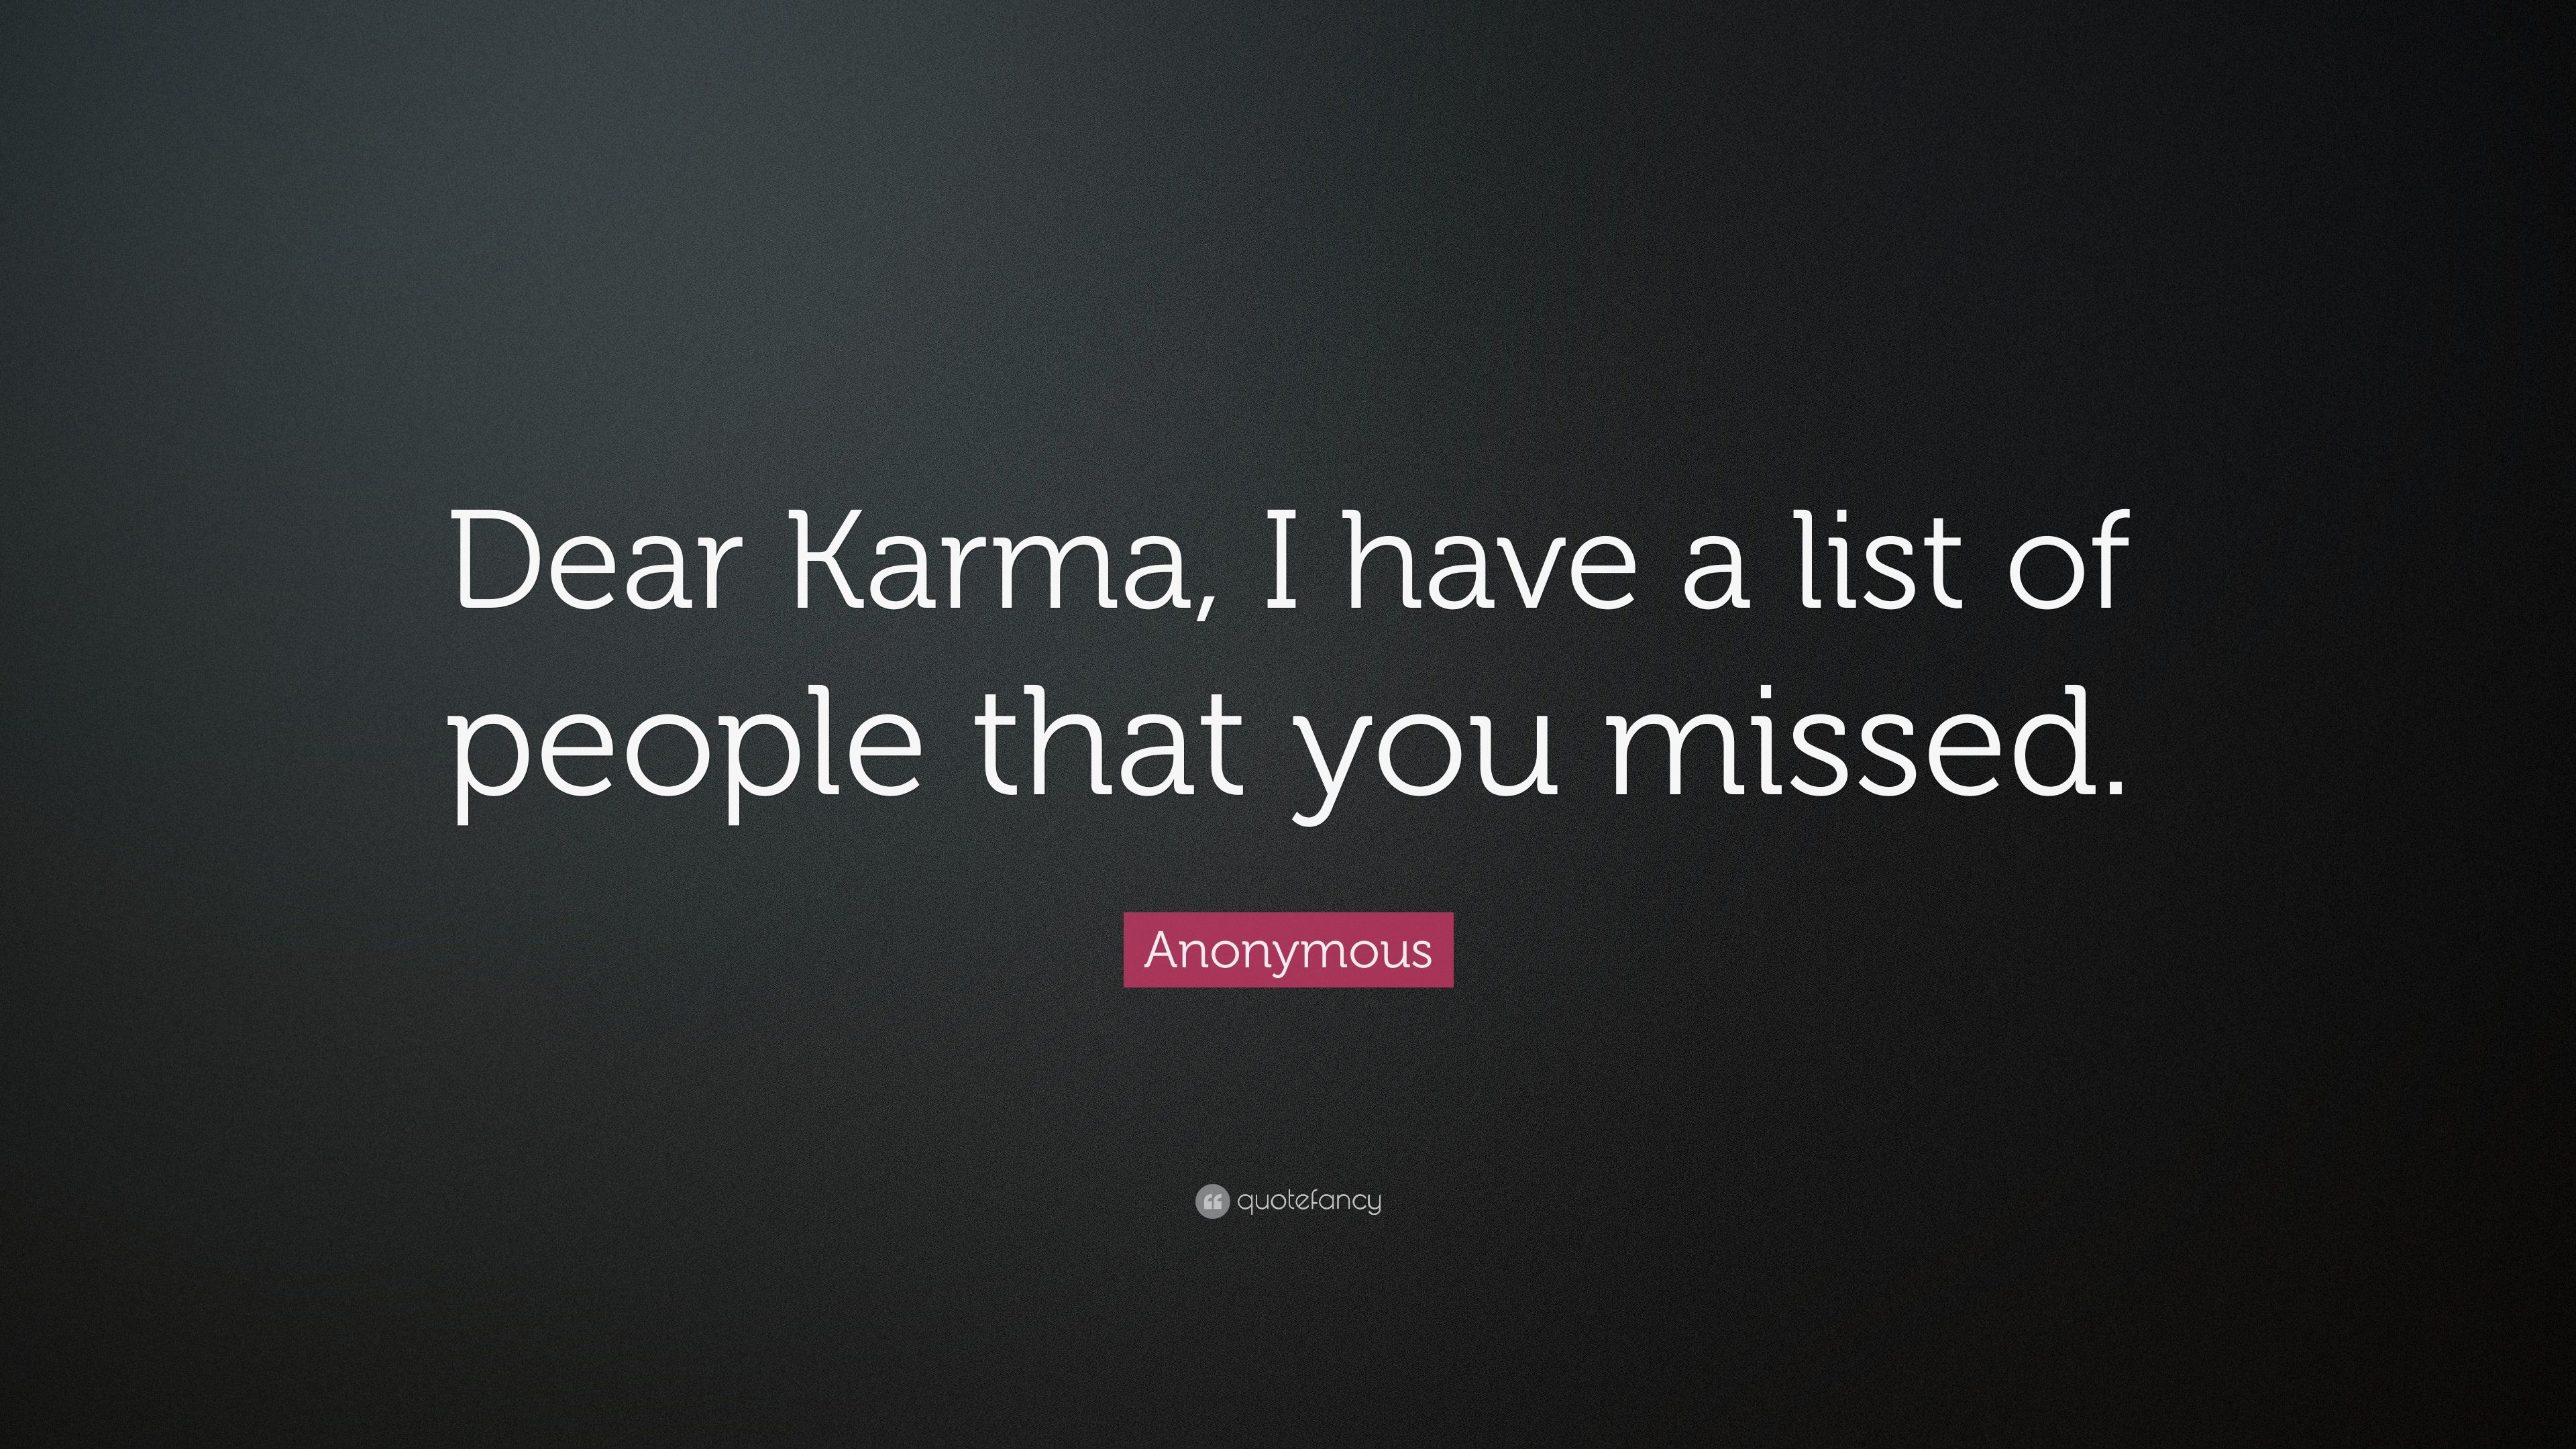 Anonymous Quote: “Dear Karma, I have a list of people that you missed.” (15 wallpaper)